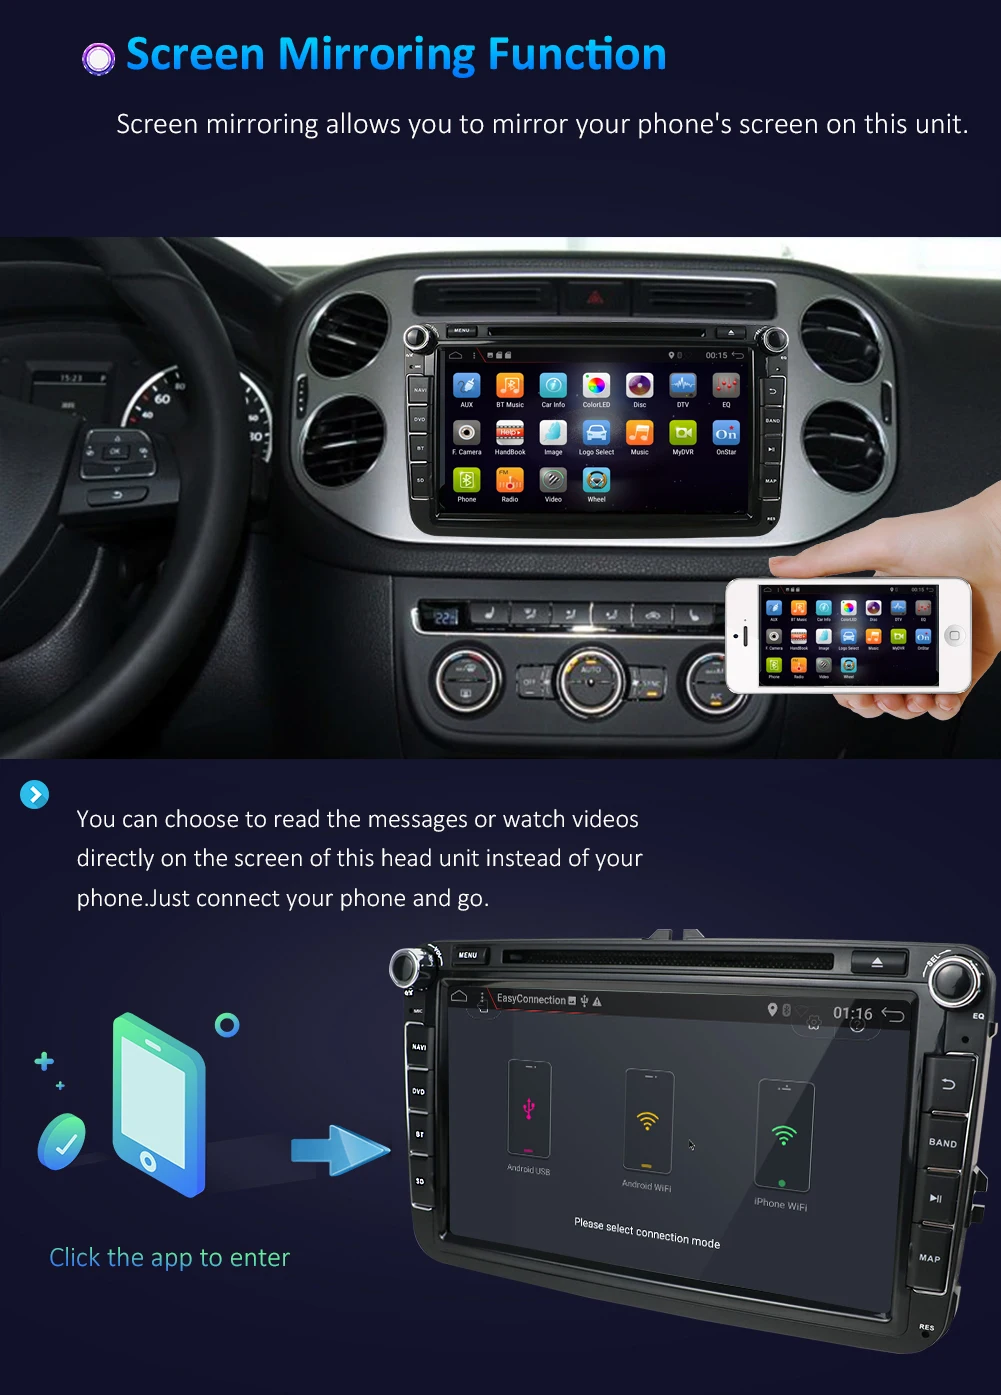 Flash Deal 2 din Android 9.0 Car Radio DVD GPS Navigation For Volkswage Caddy Golf Polo Sedan Touran Passat EOS DVD Automtivo WIF 15